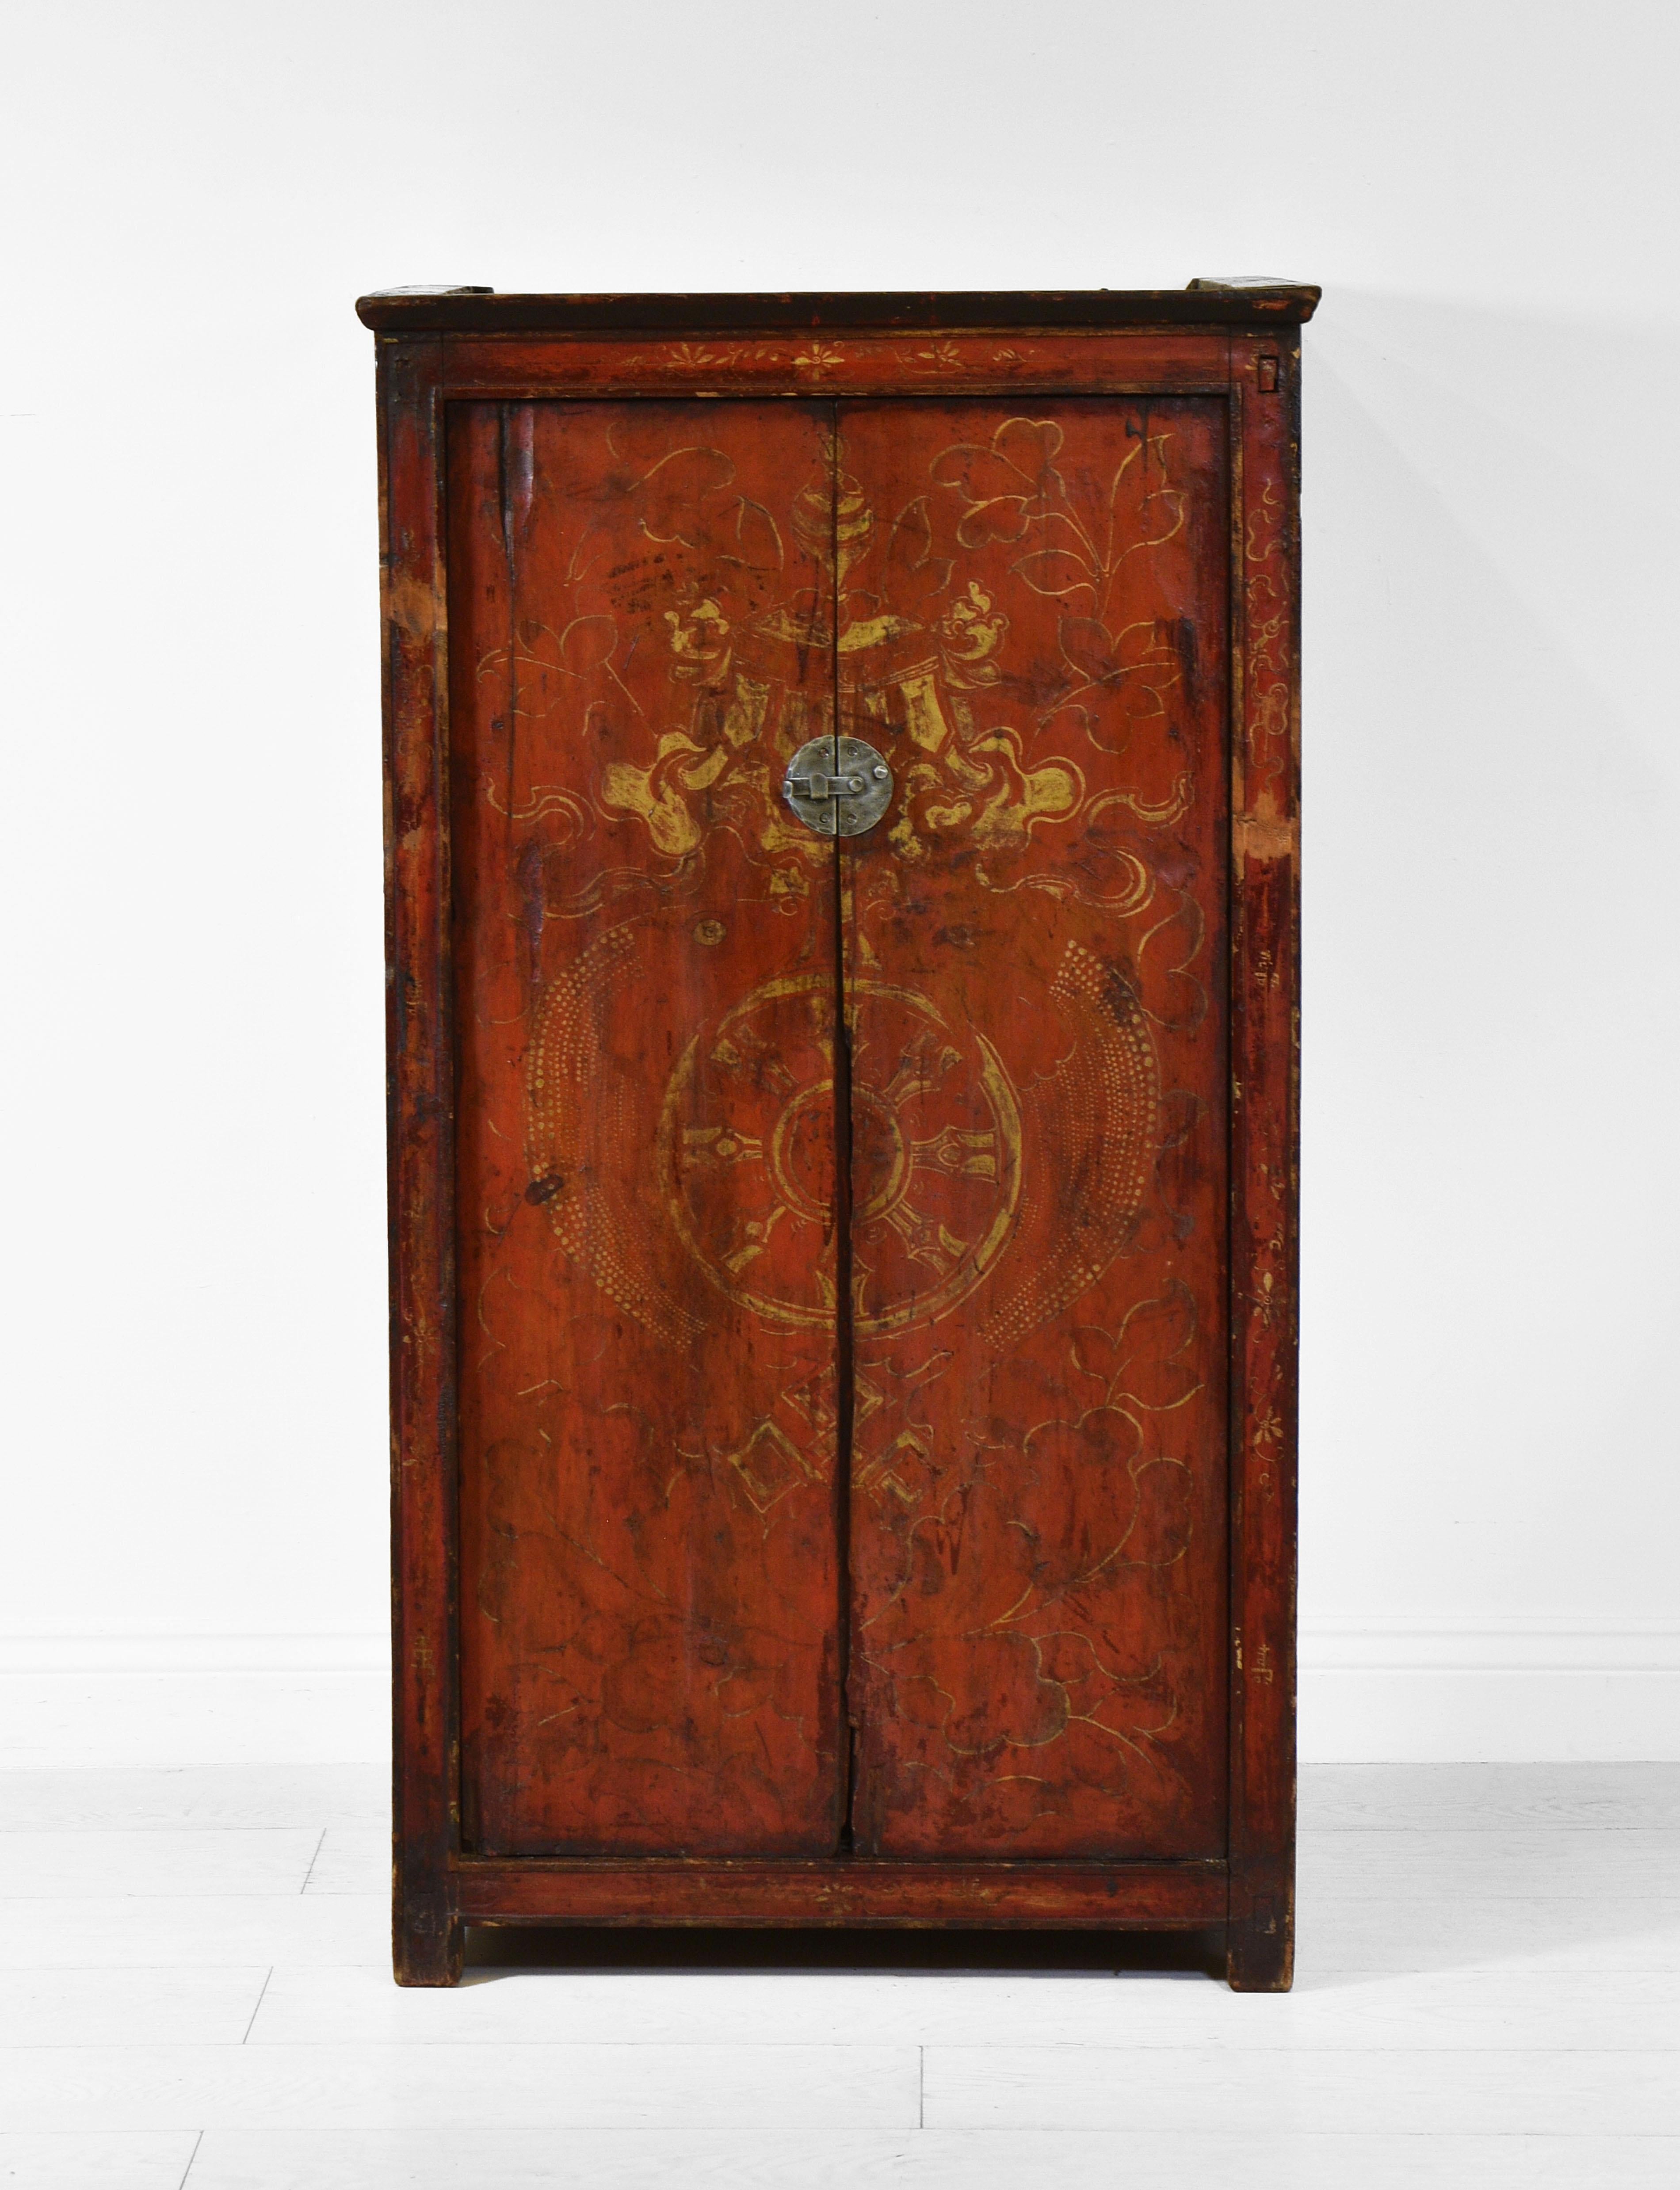 A wonderful antique Tibetan or Nepalese painted rustic pine cupboard. Circa 19th Century.

The piece is hand painted with natural pigments, and the finish to the front has lovely warm tones.

The cupboard is of a good, deep design. The doors